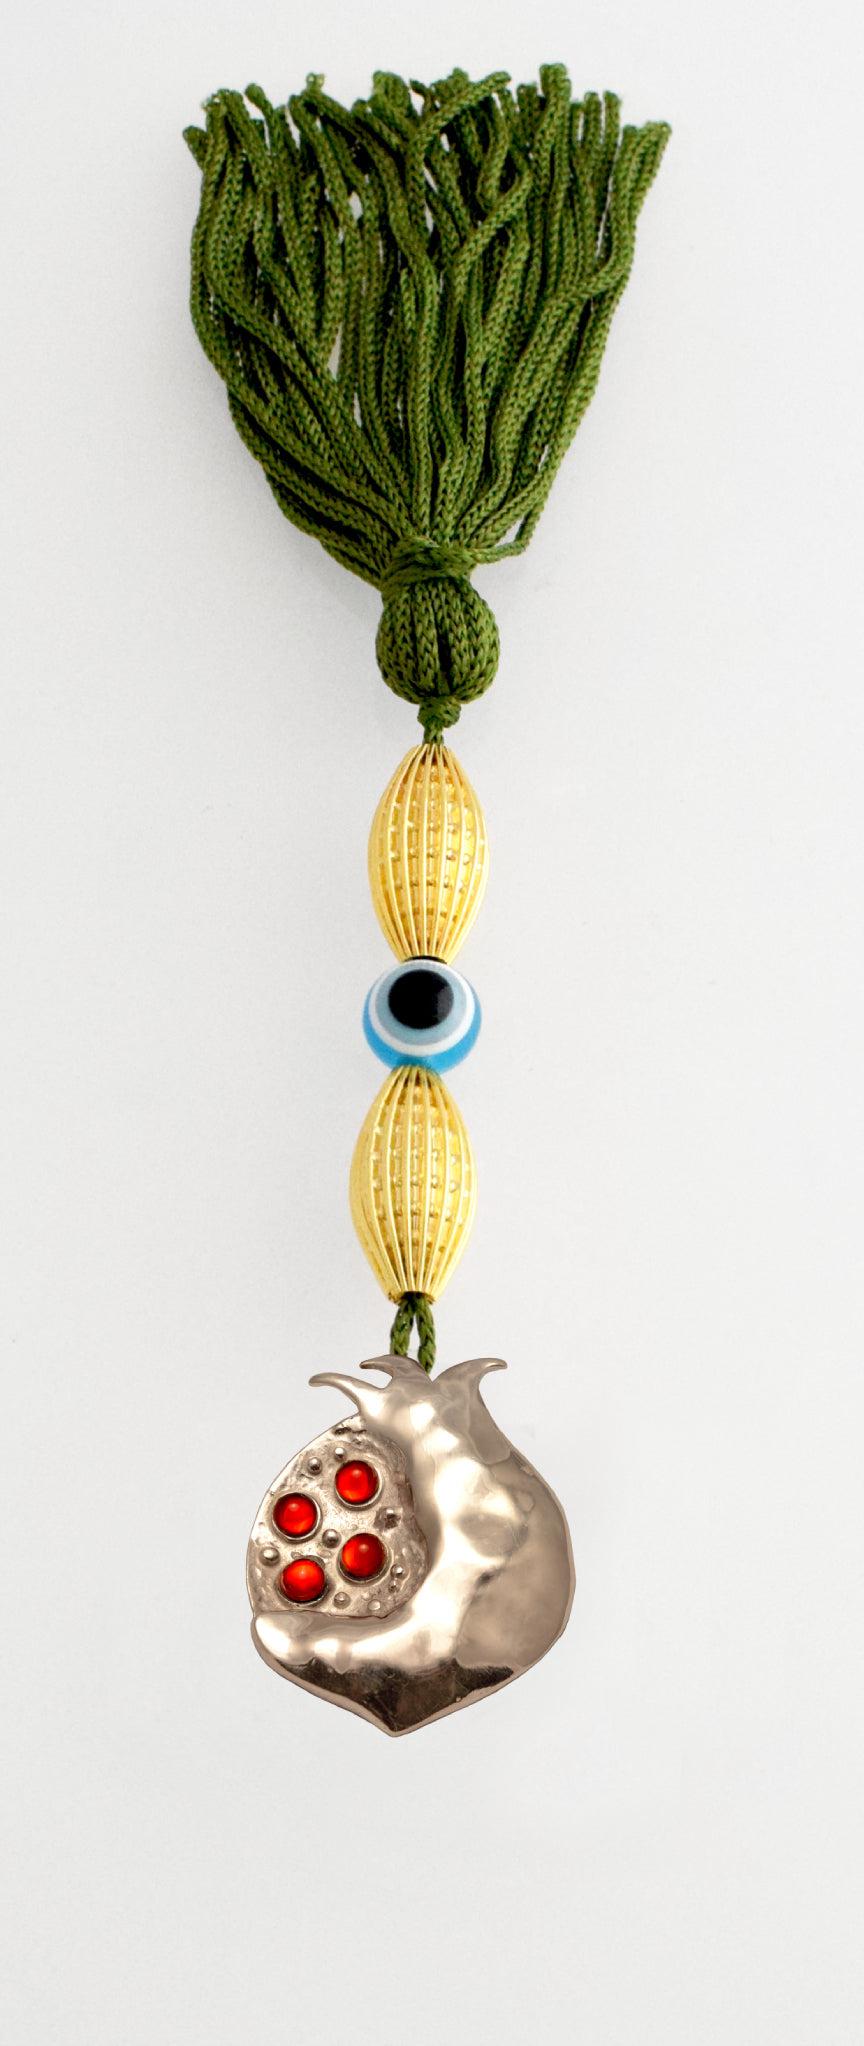 Evil Eye Charm on a tassel, House decoration, holiday decor, welcome gift, silver charm, Pomegranate Charm